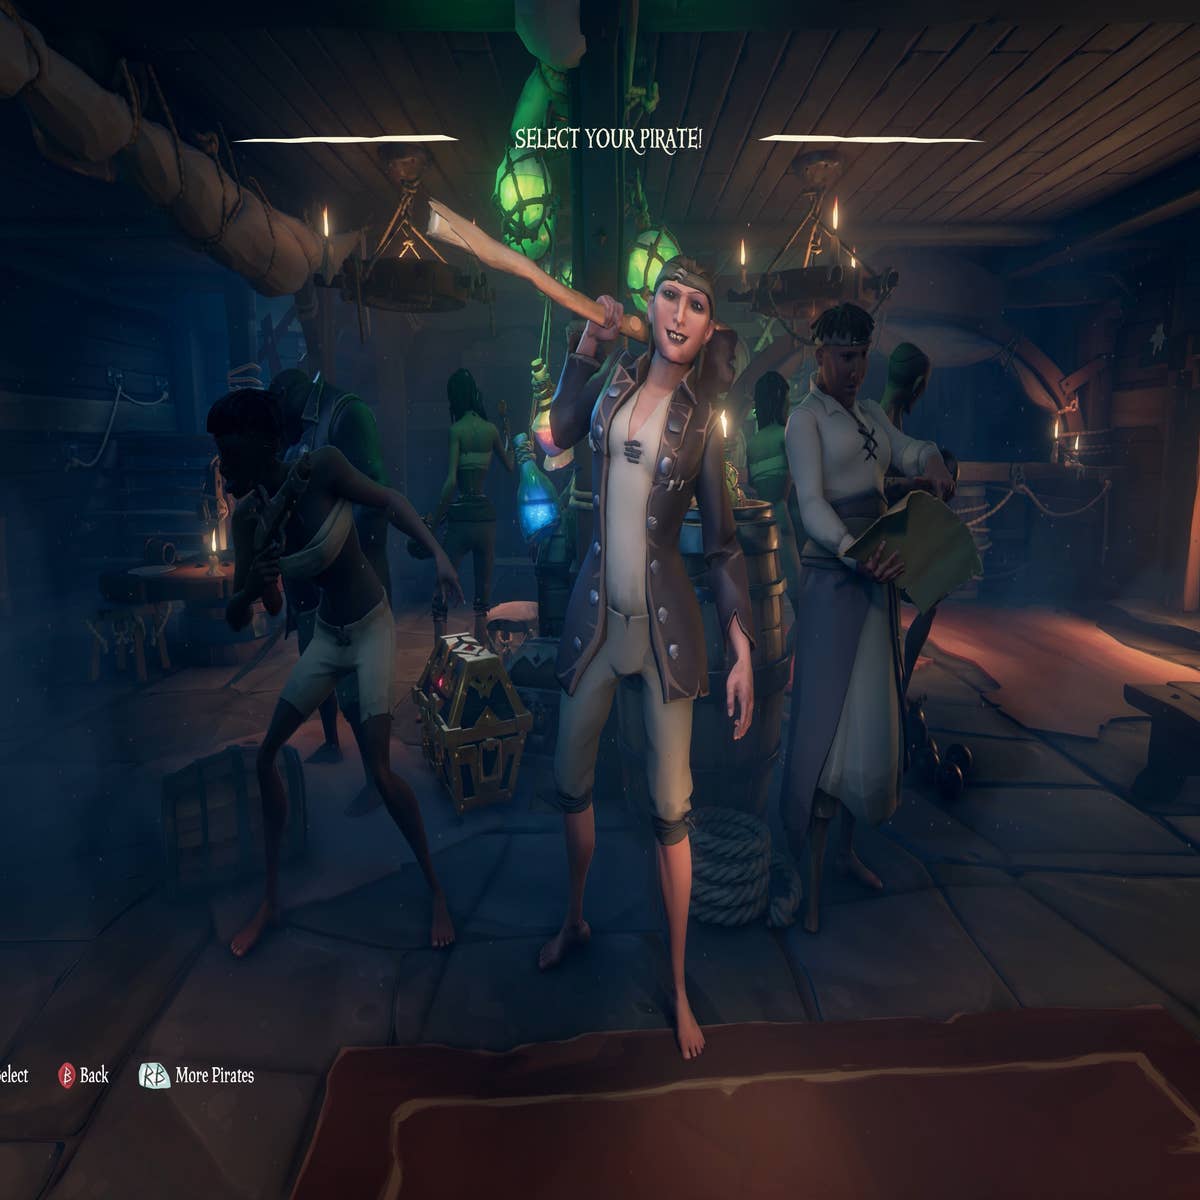 Fans applaud Sea of Thieves' first trans character - Video Games